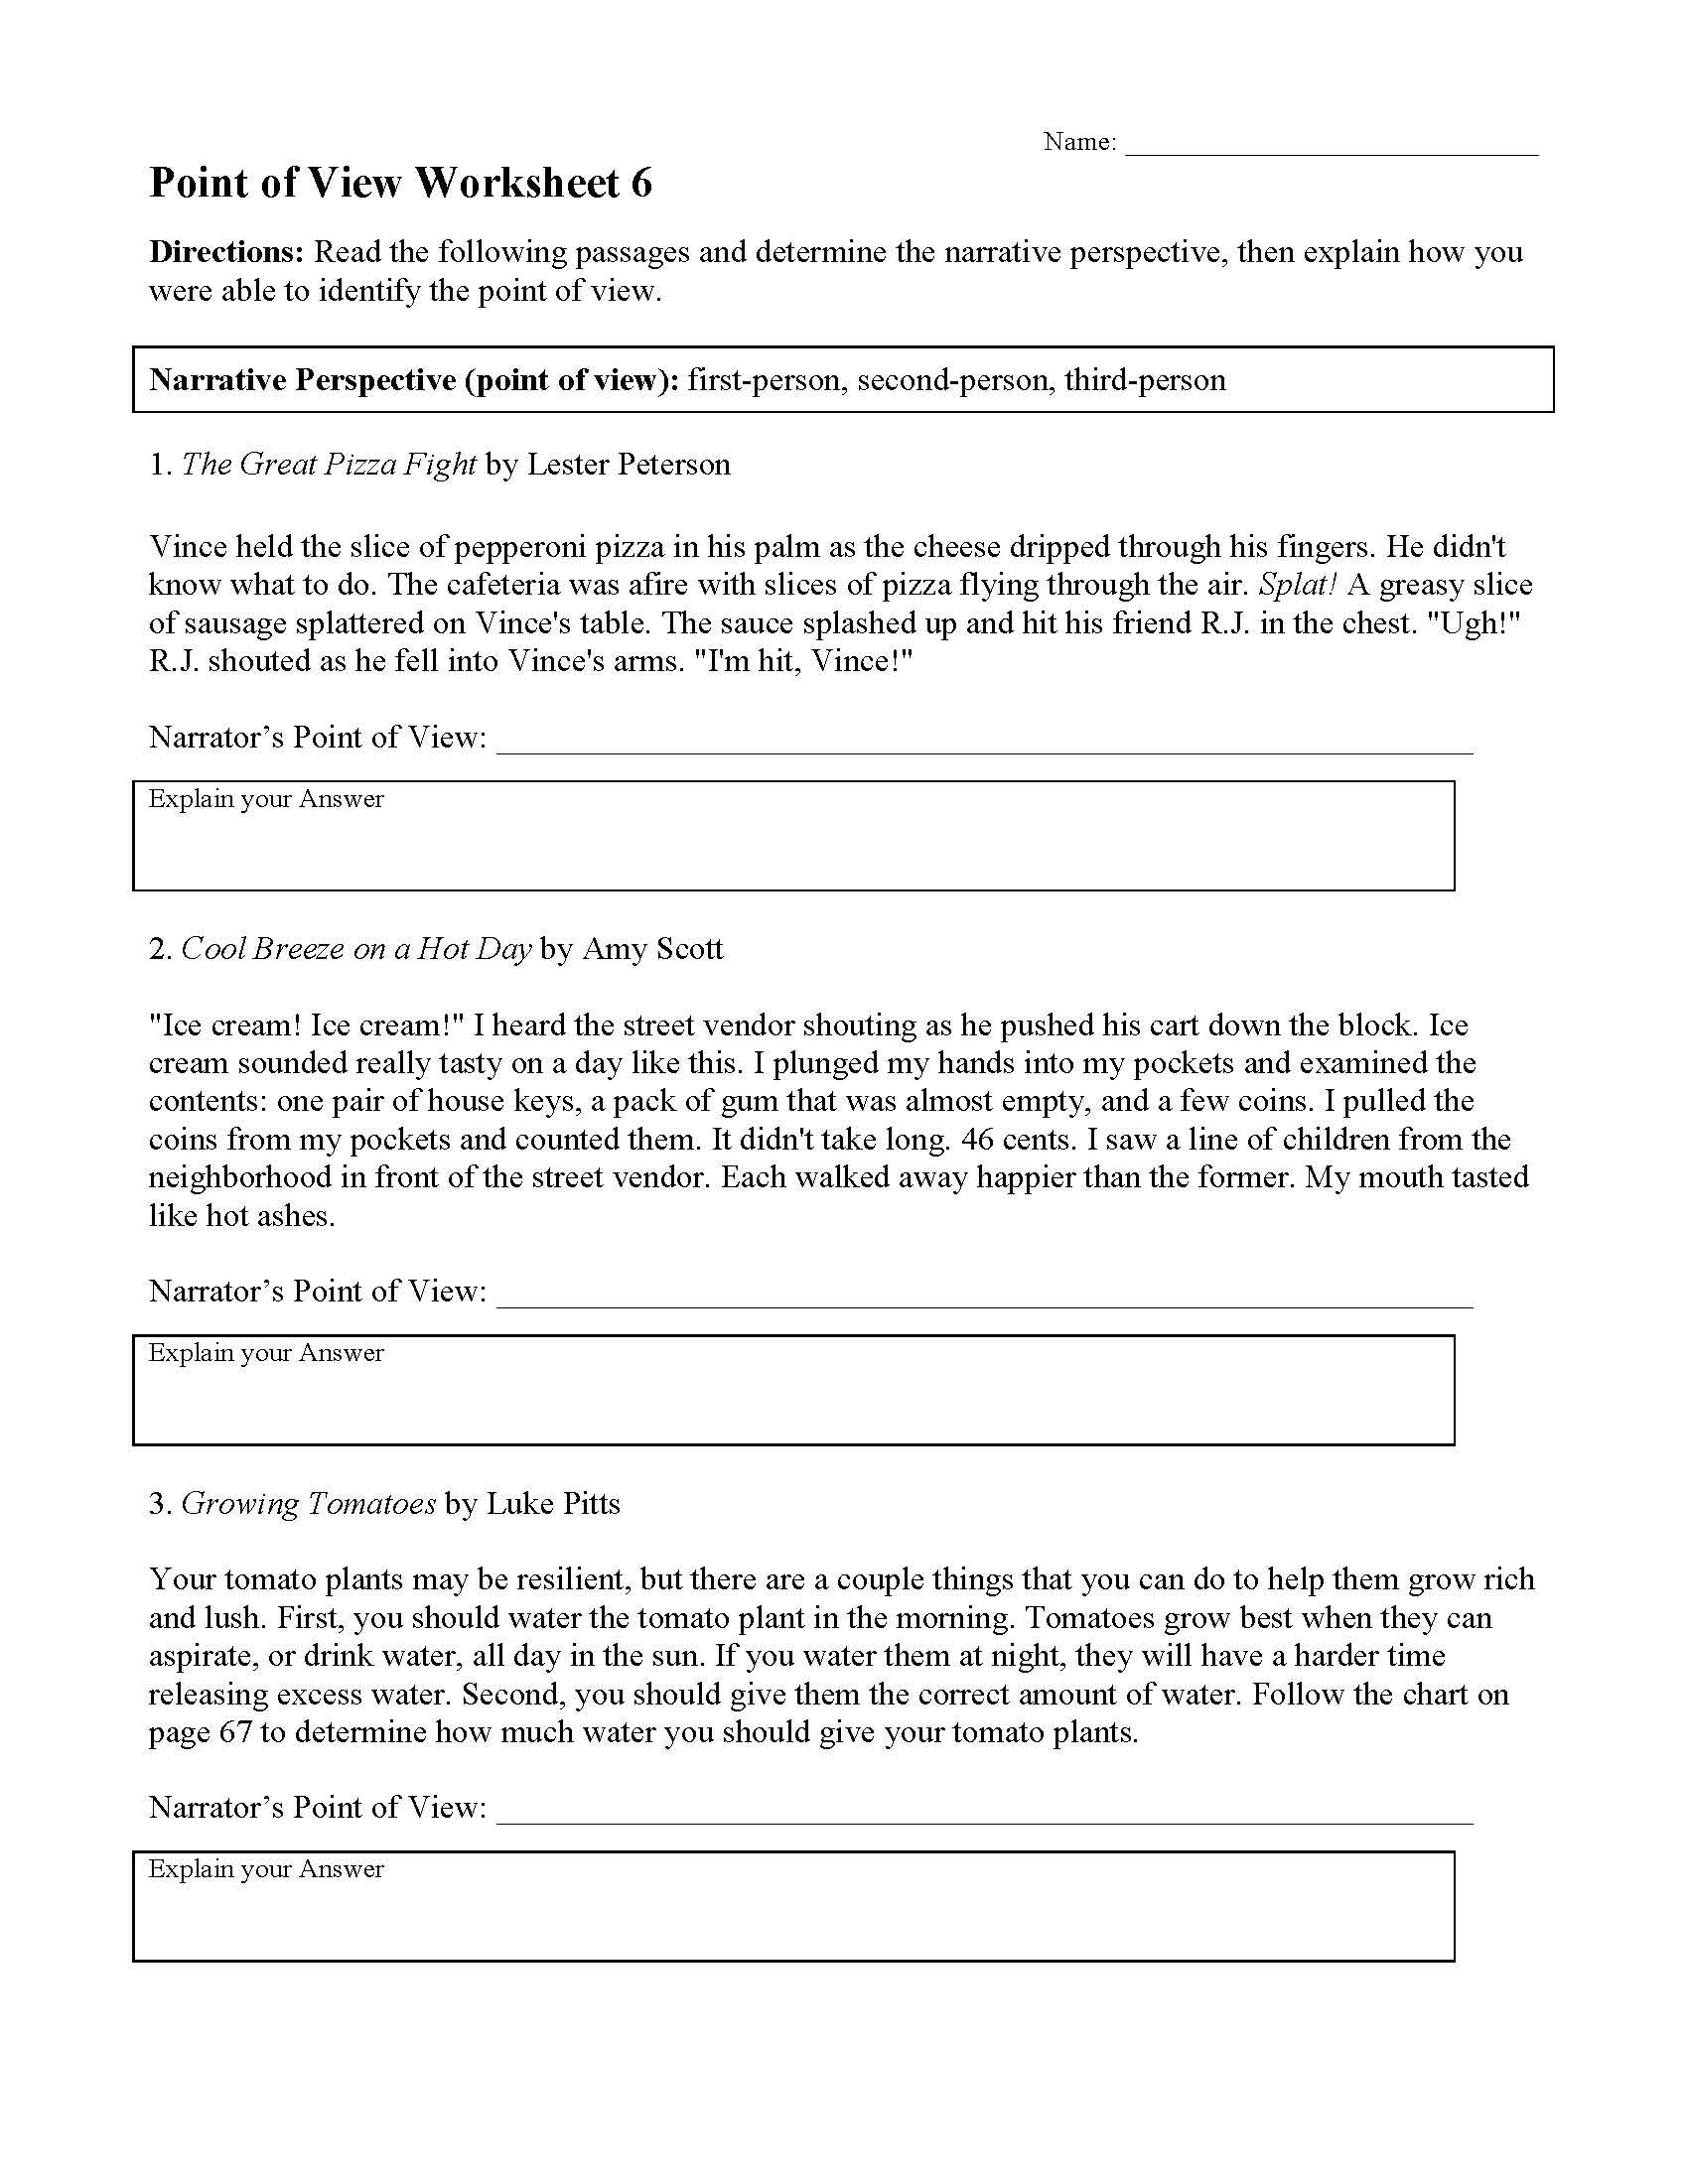 This is a preview image of the Point of View Worksheet 6.